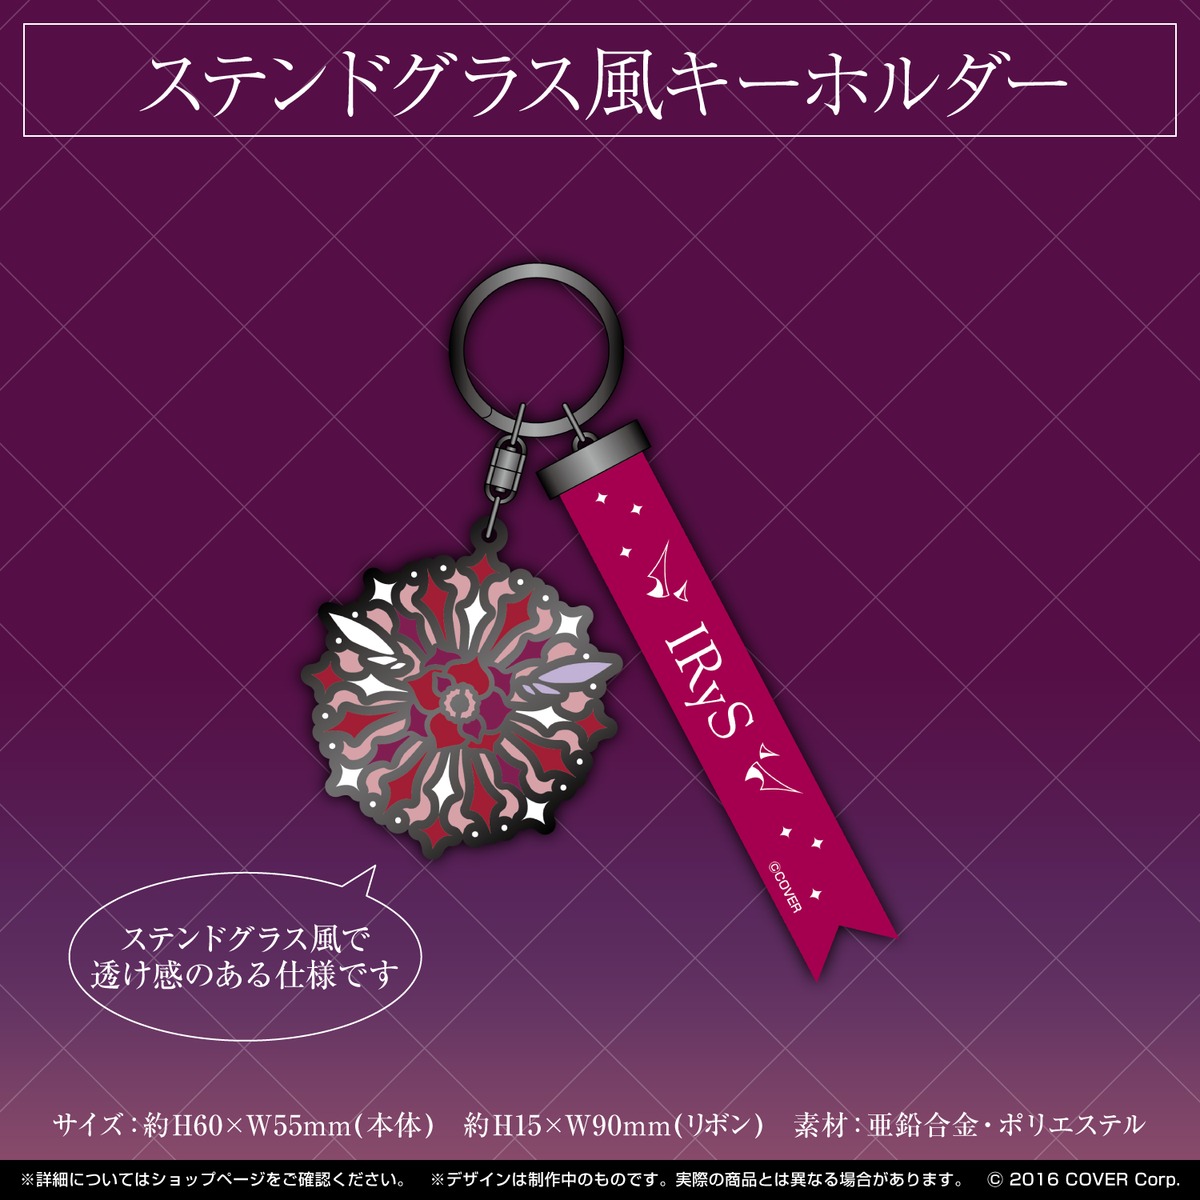 New Hololive Irys Journey EP and Keychain on the Way 1